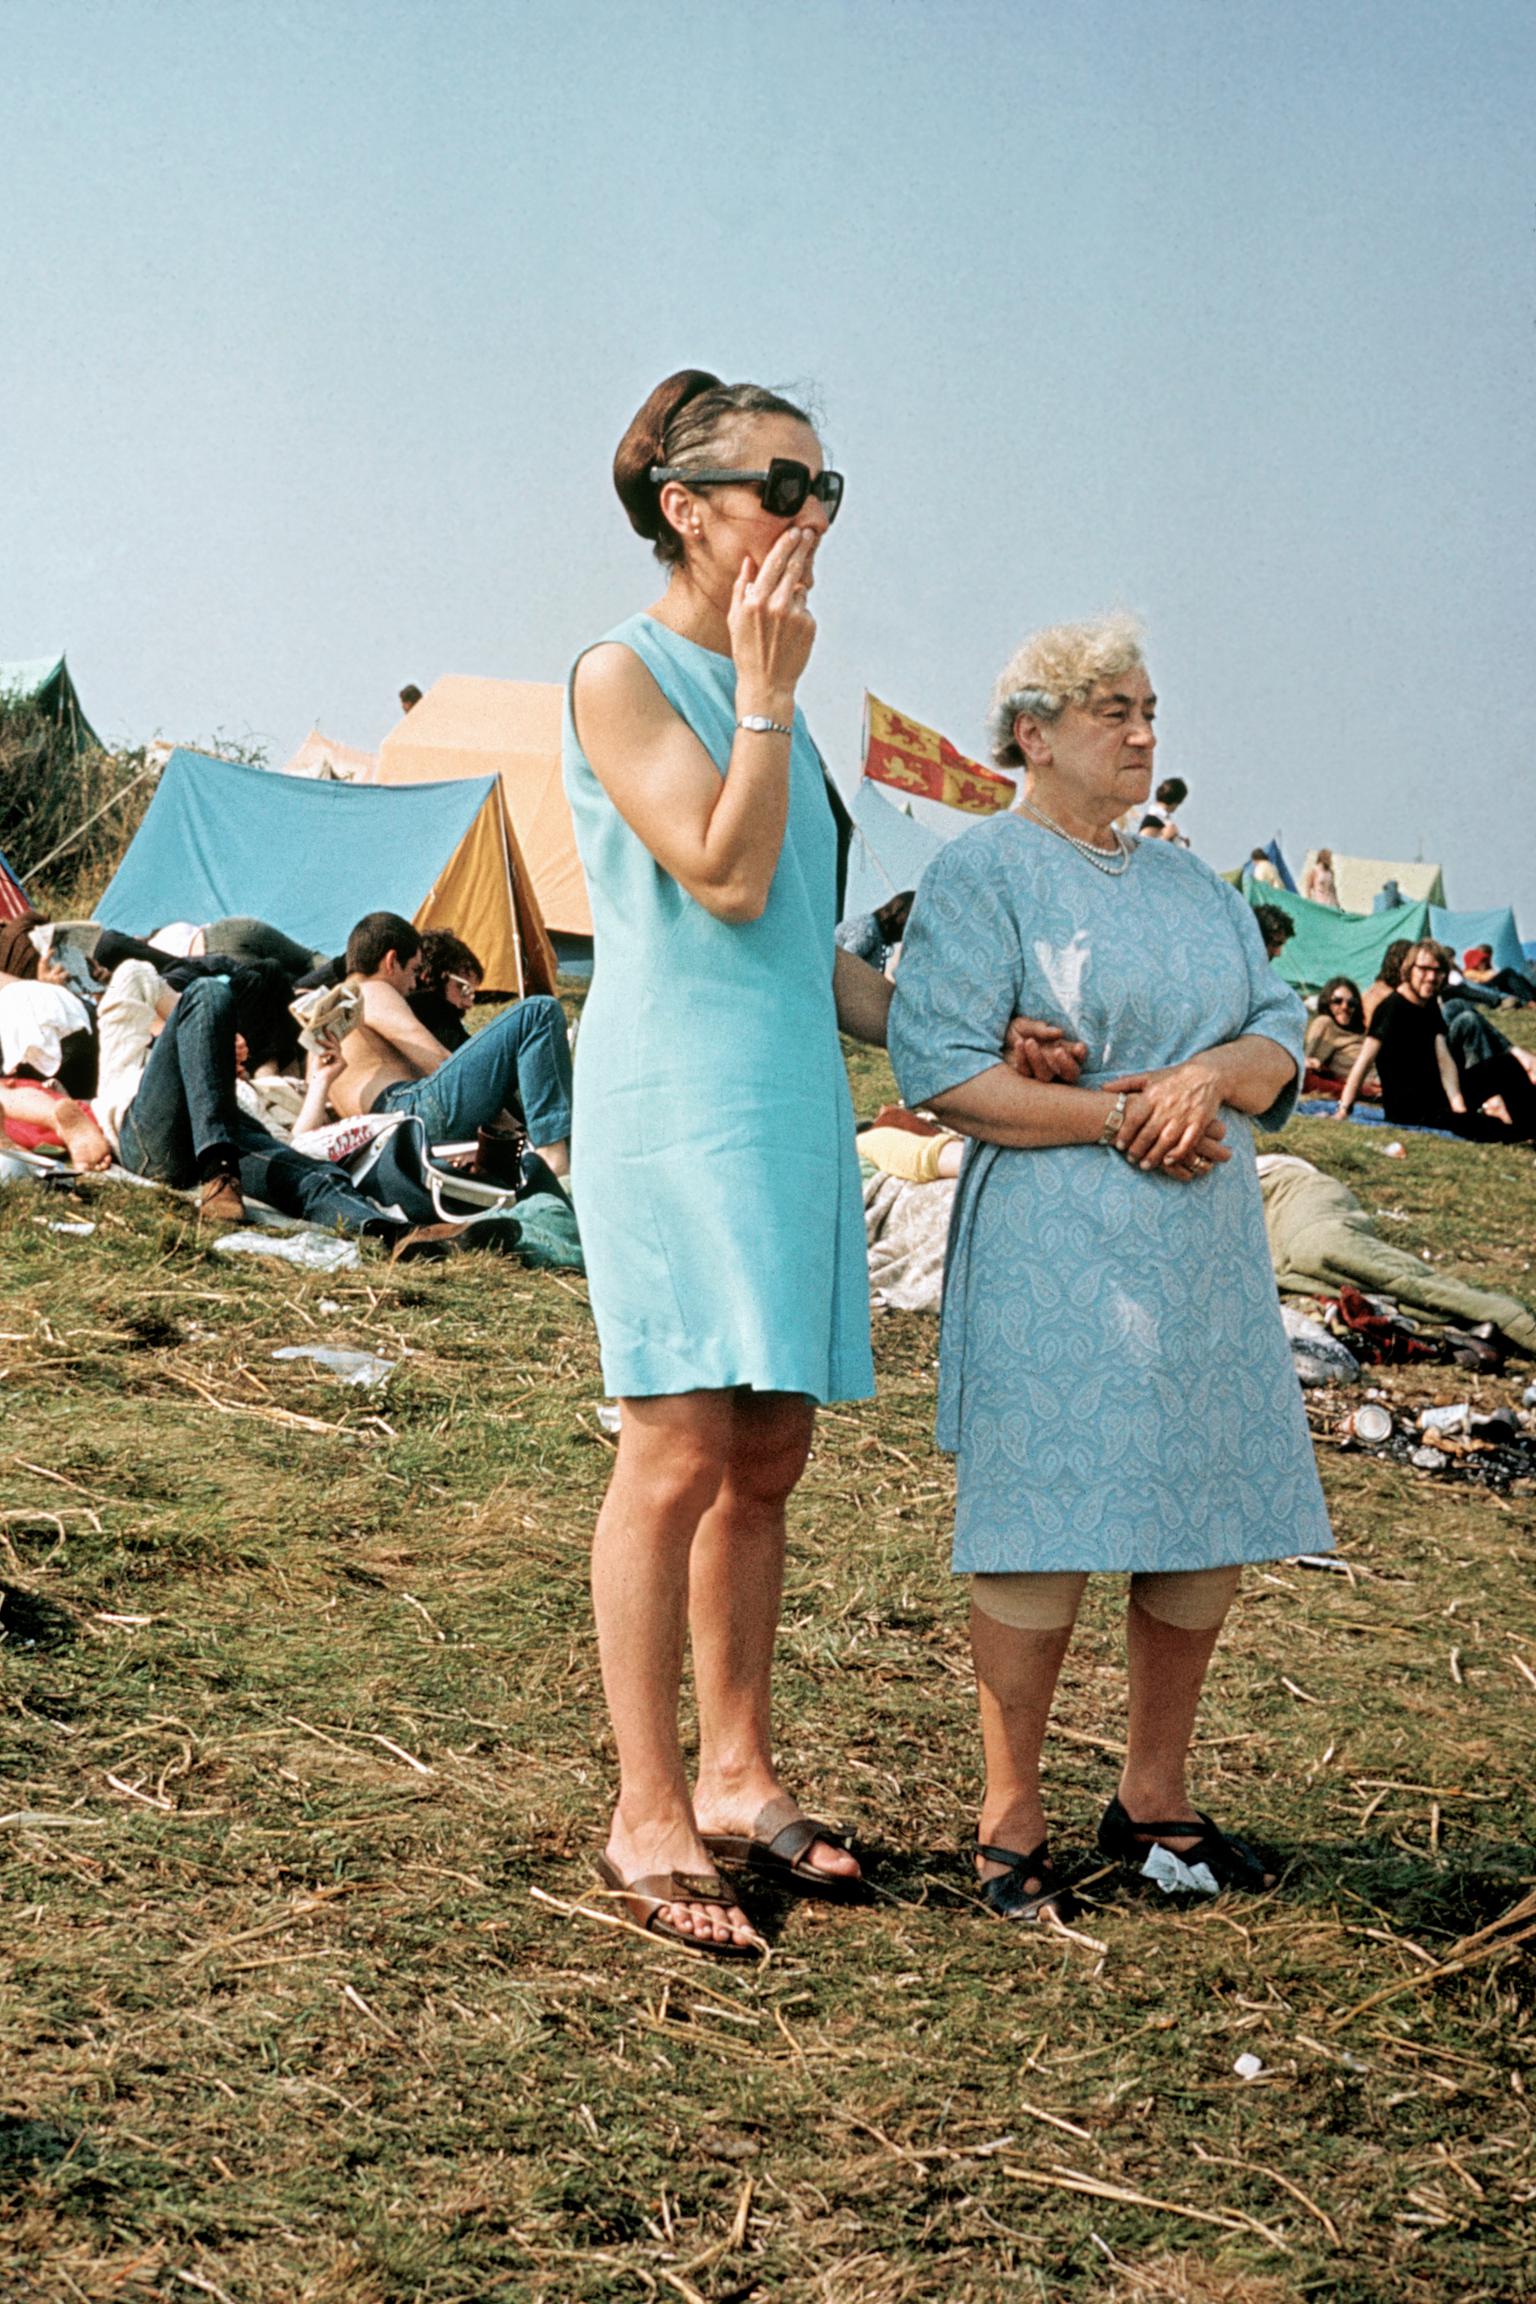 Isle of Wight Festival. Two Isle of Wight residents look out over the festival site